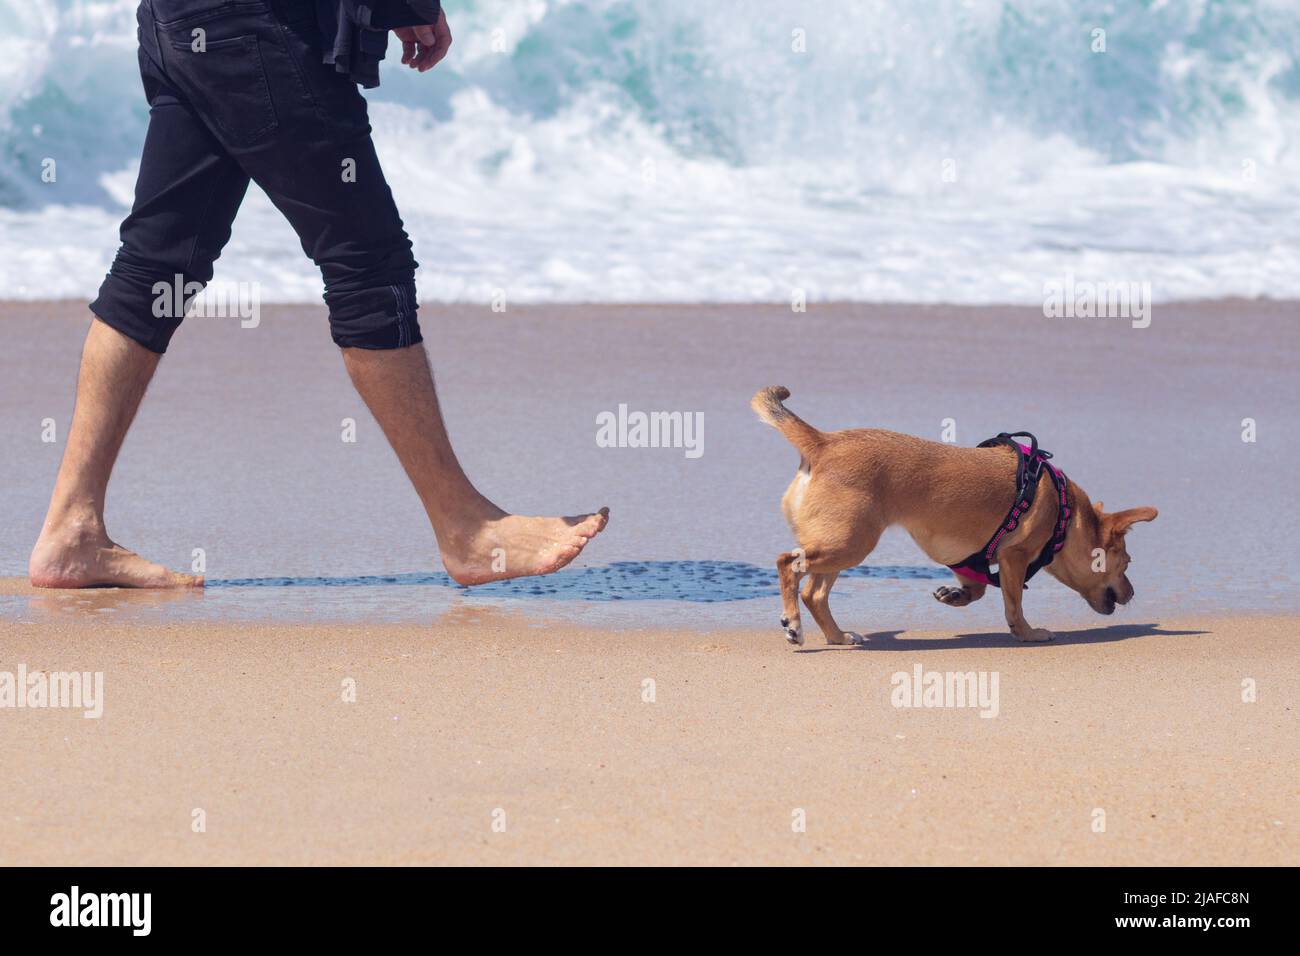 A small dog walking off-leash sniffing the sand near owner on a walk in the beach along seashore Stock Photo